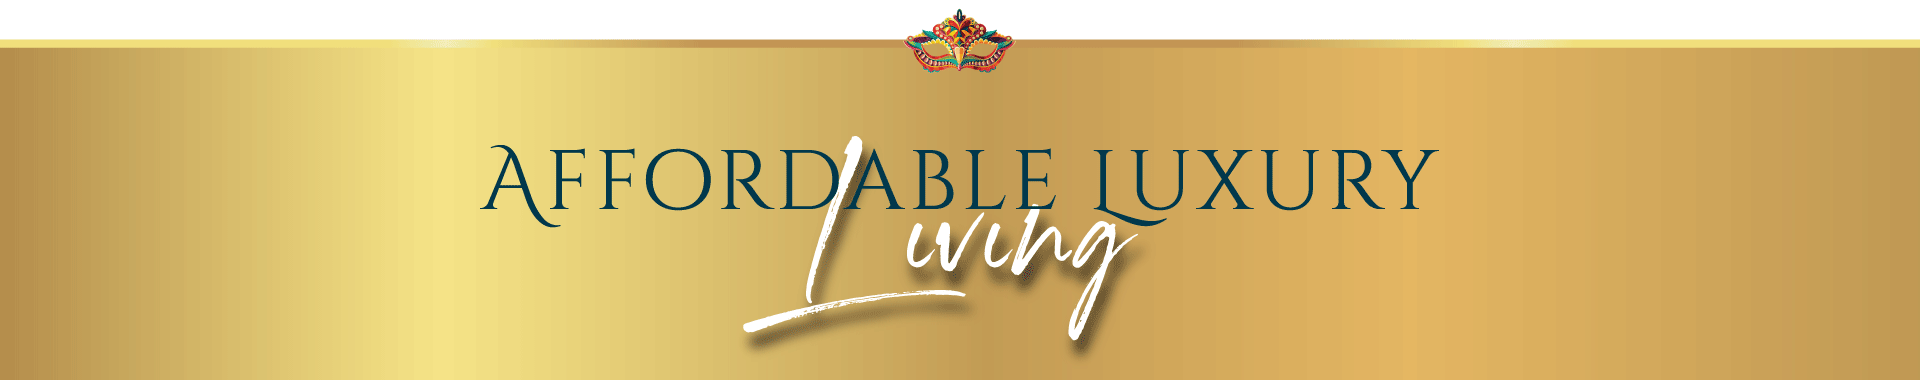 afordable-luxury-living-banner